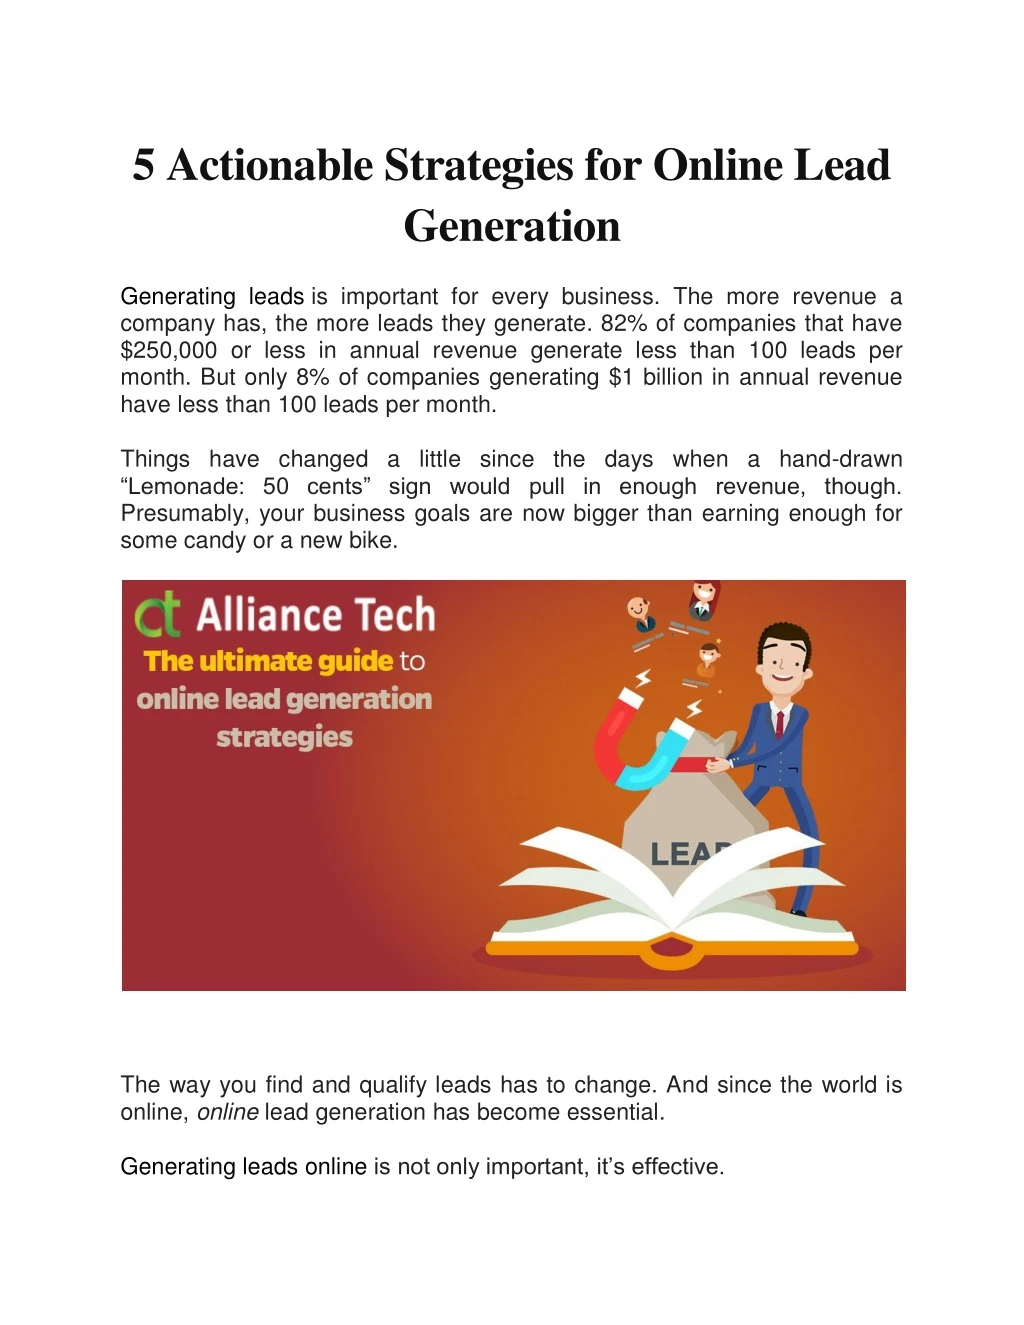 5 actionable strategies for online lead generation